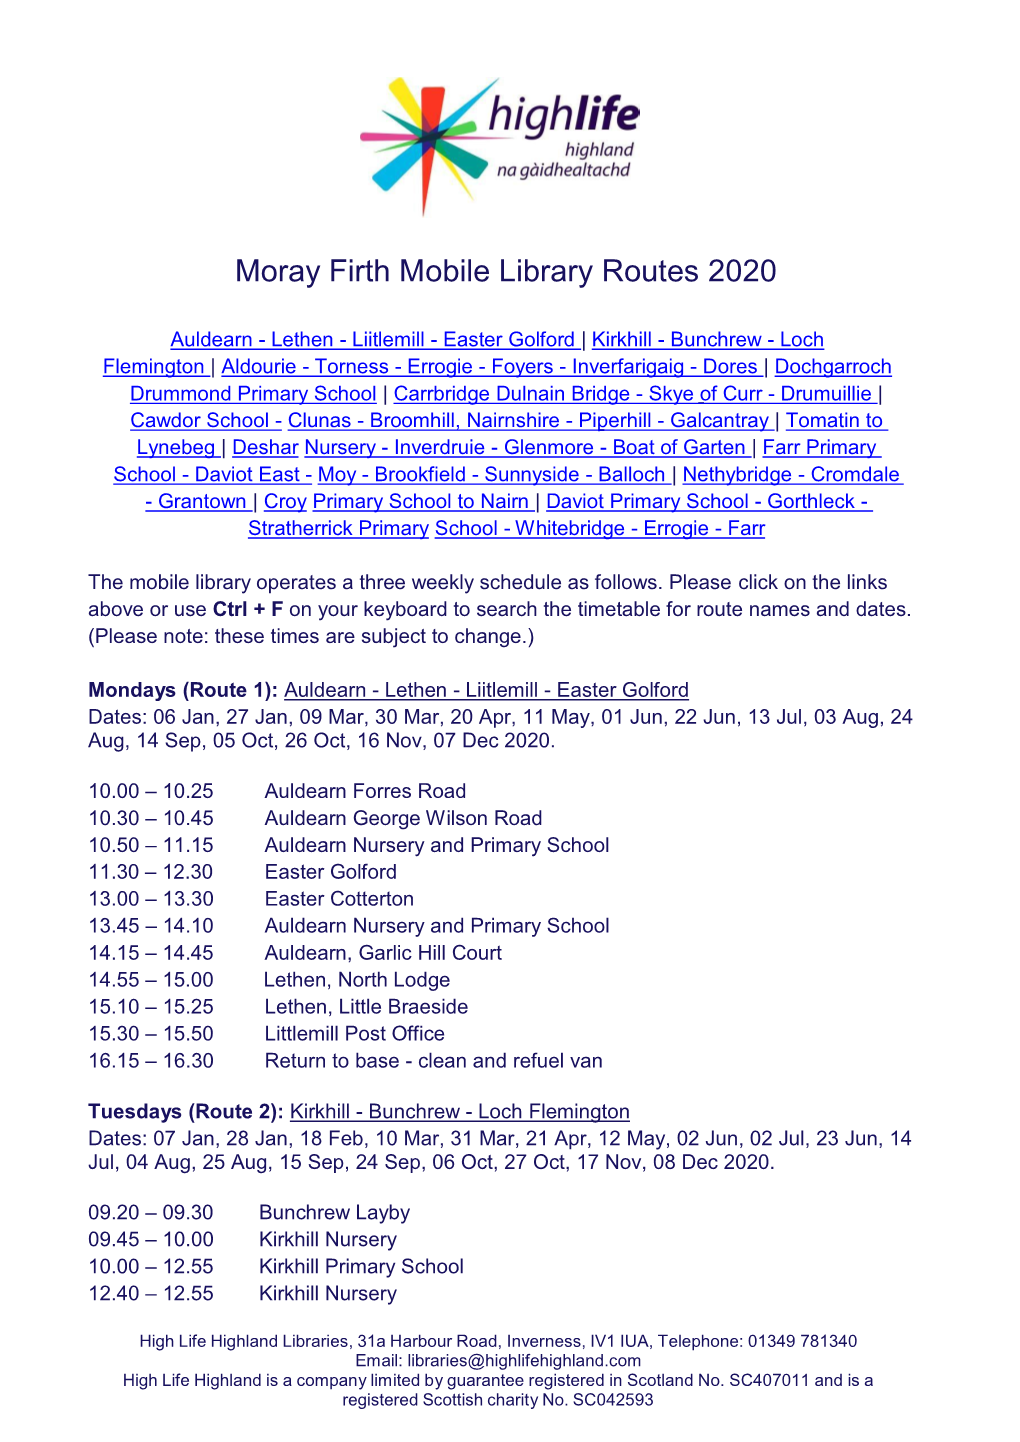 Moray Firth Mobile Library Routes 2020